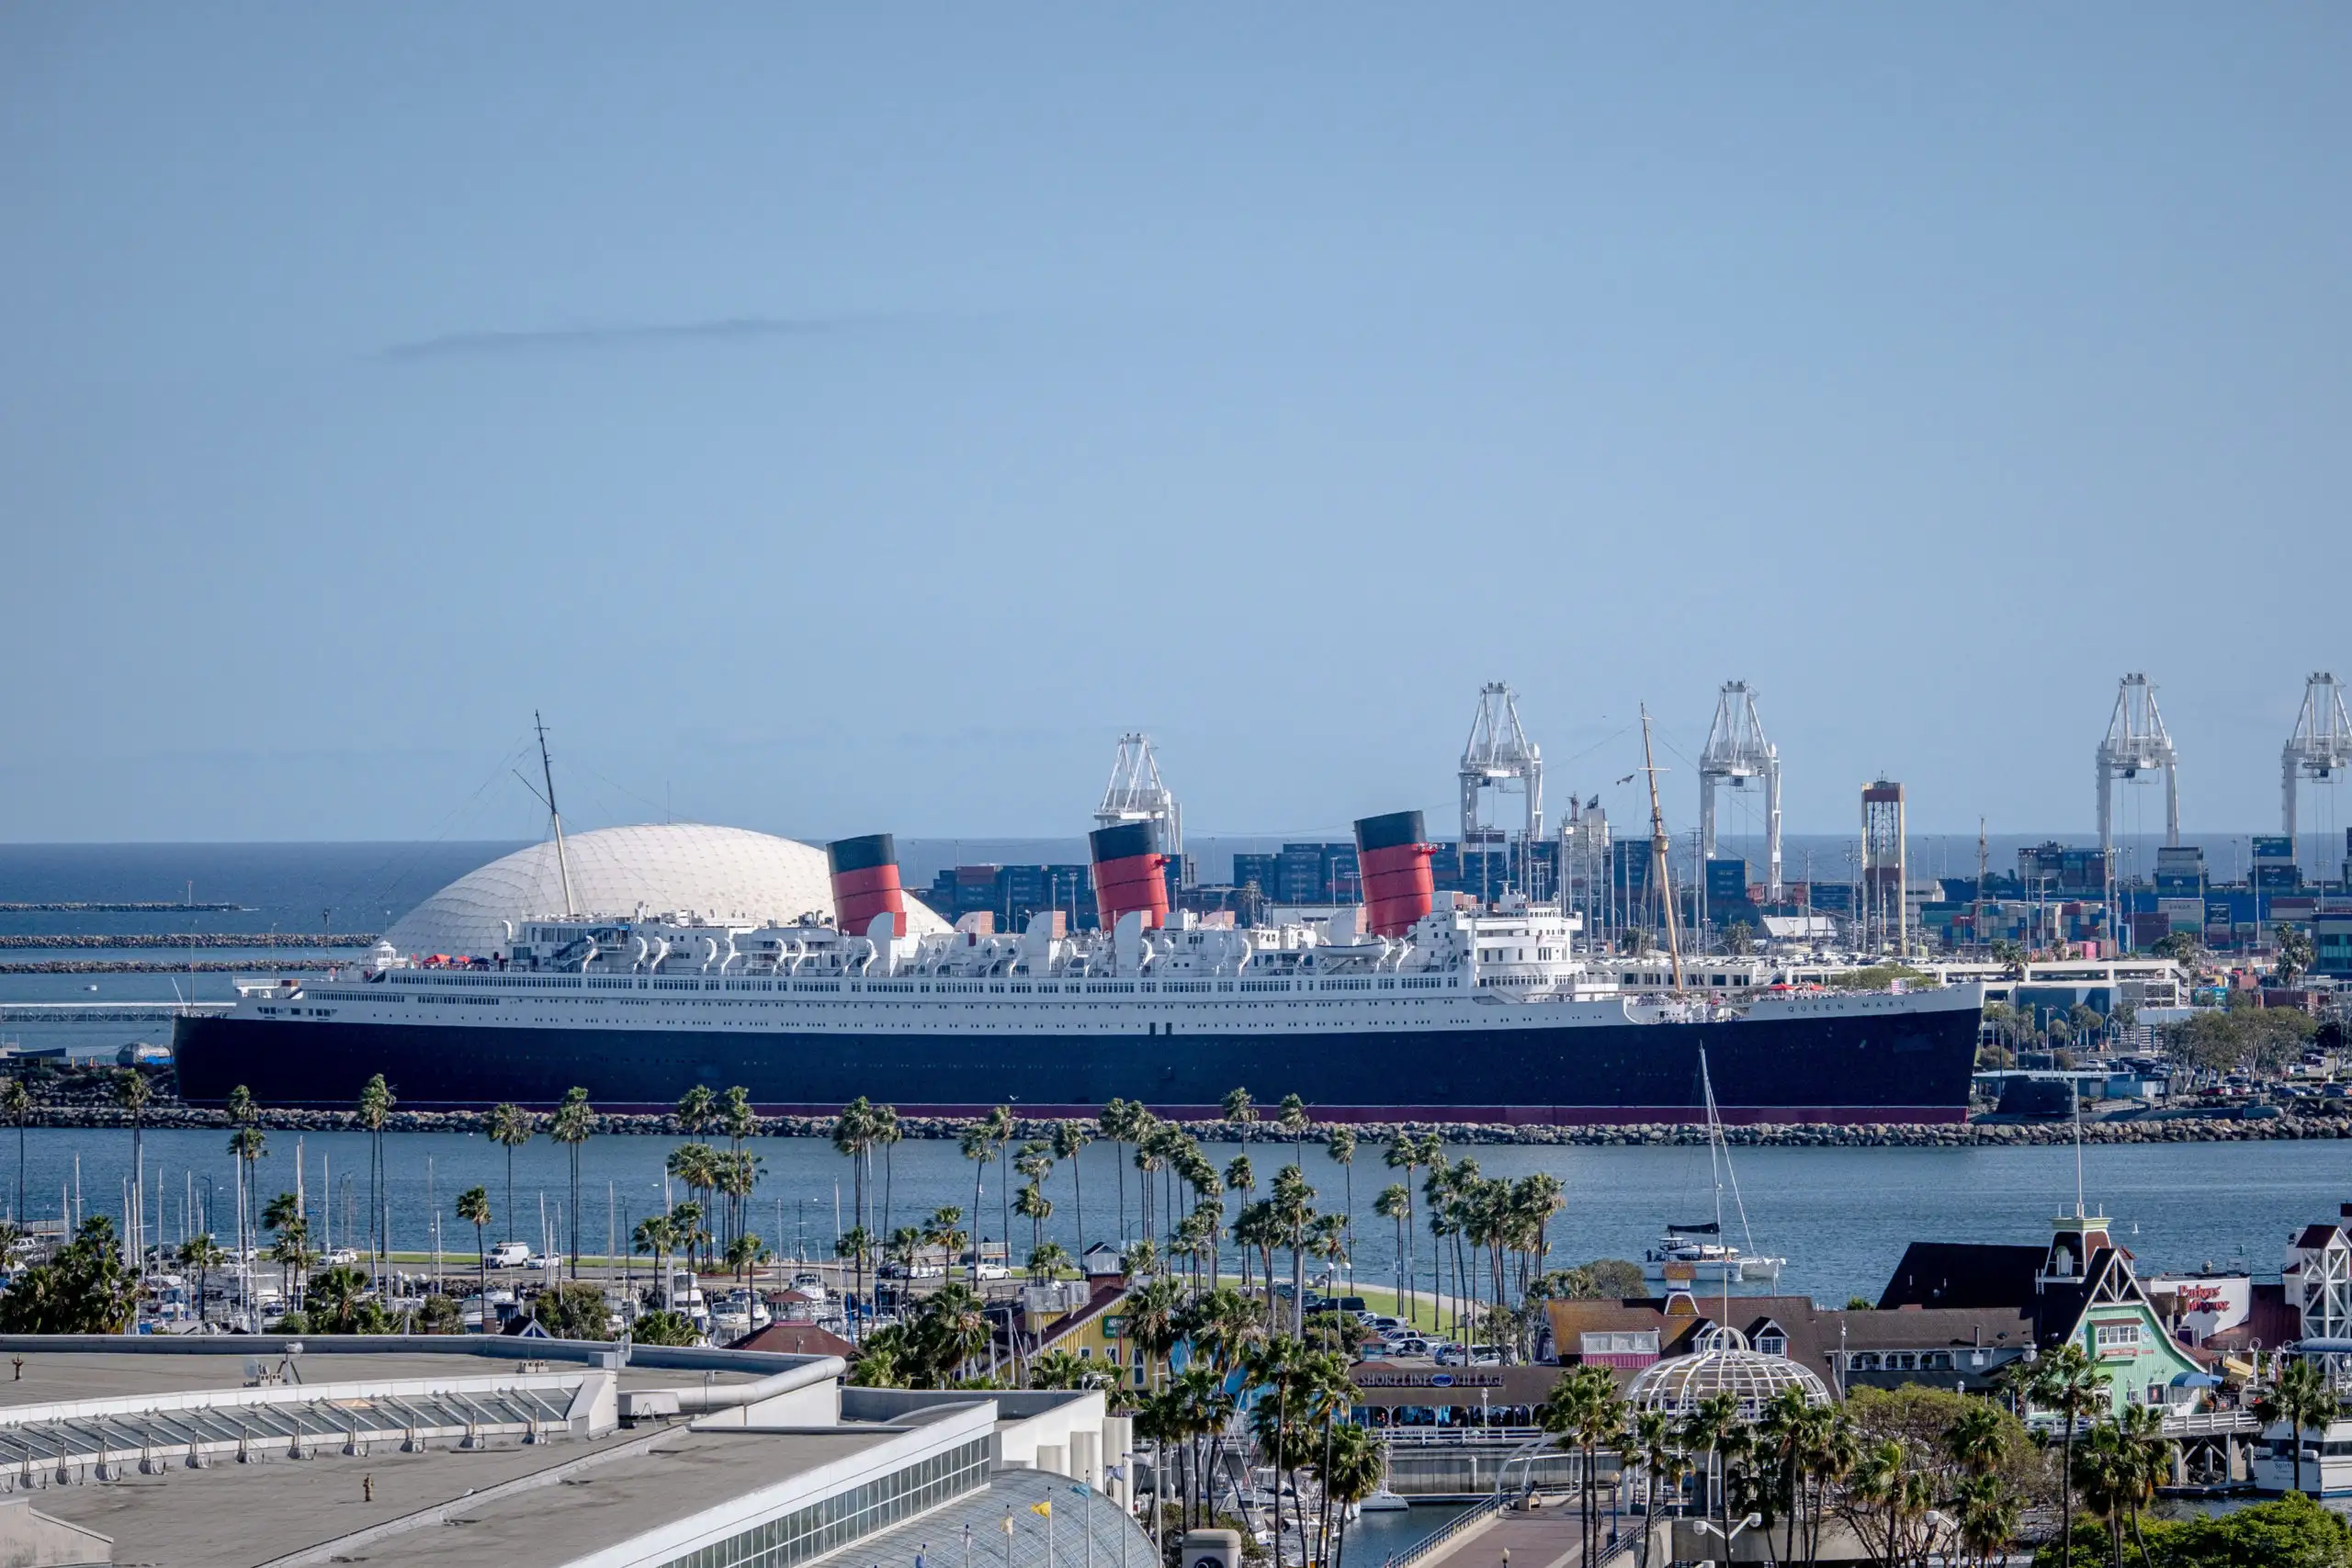 Queen Mary as seen from a distance